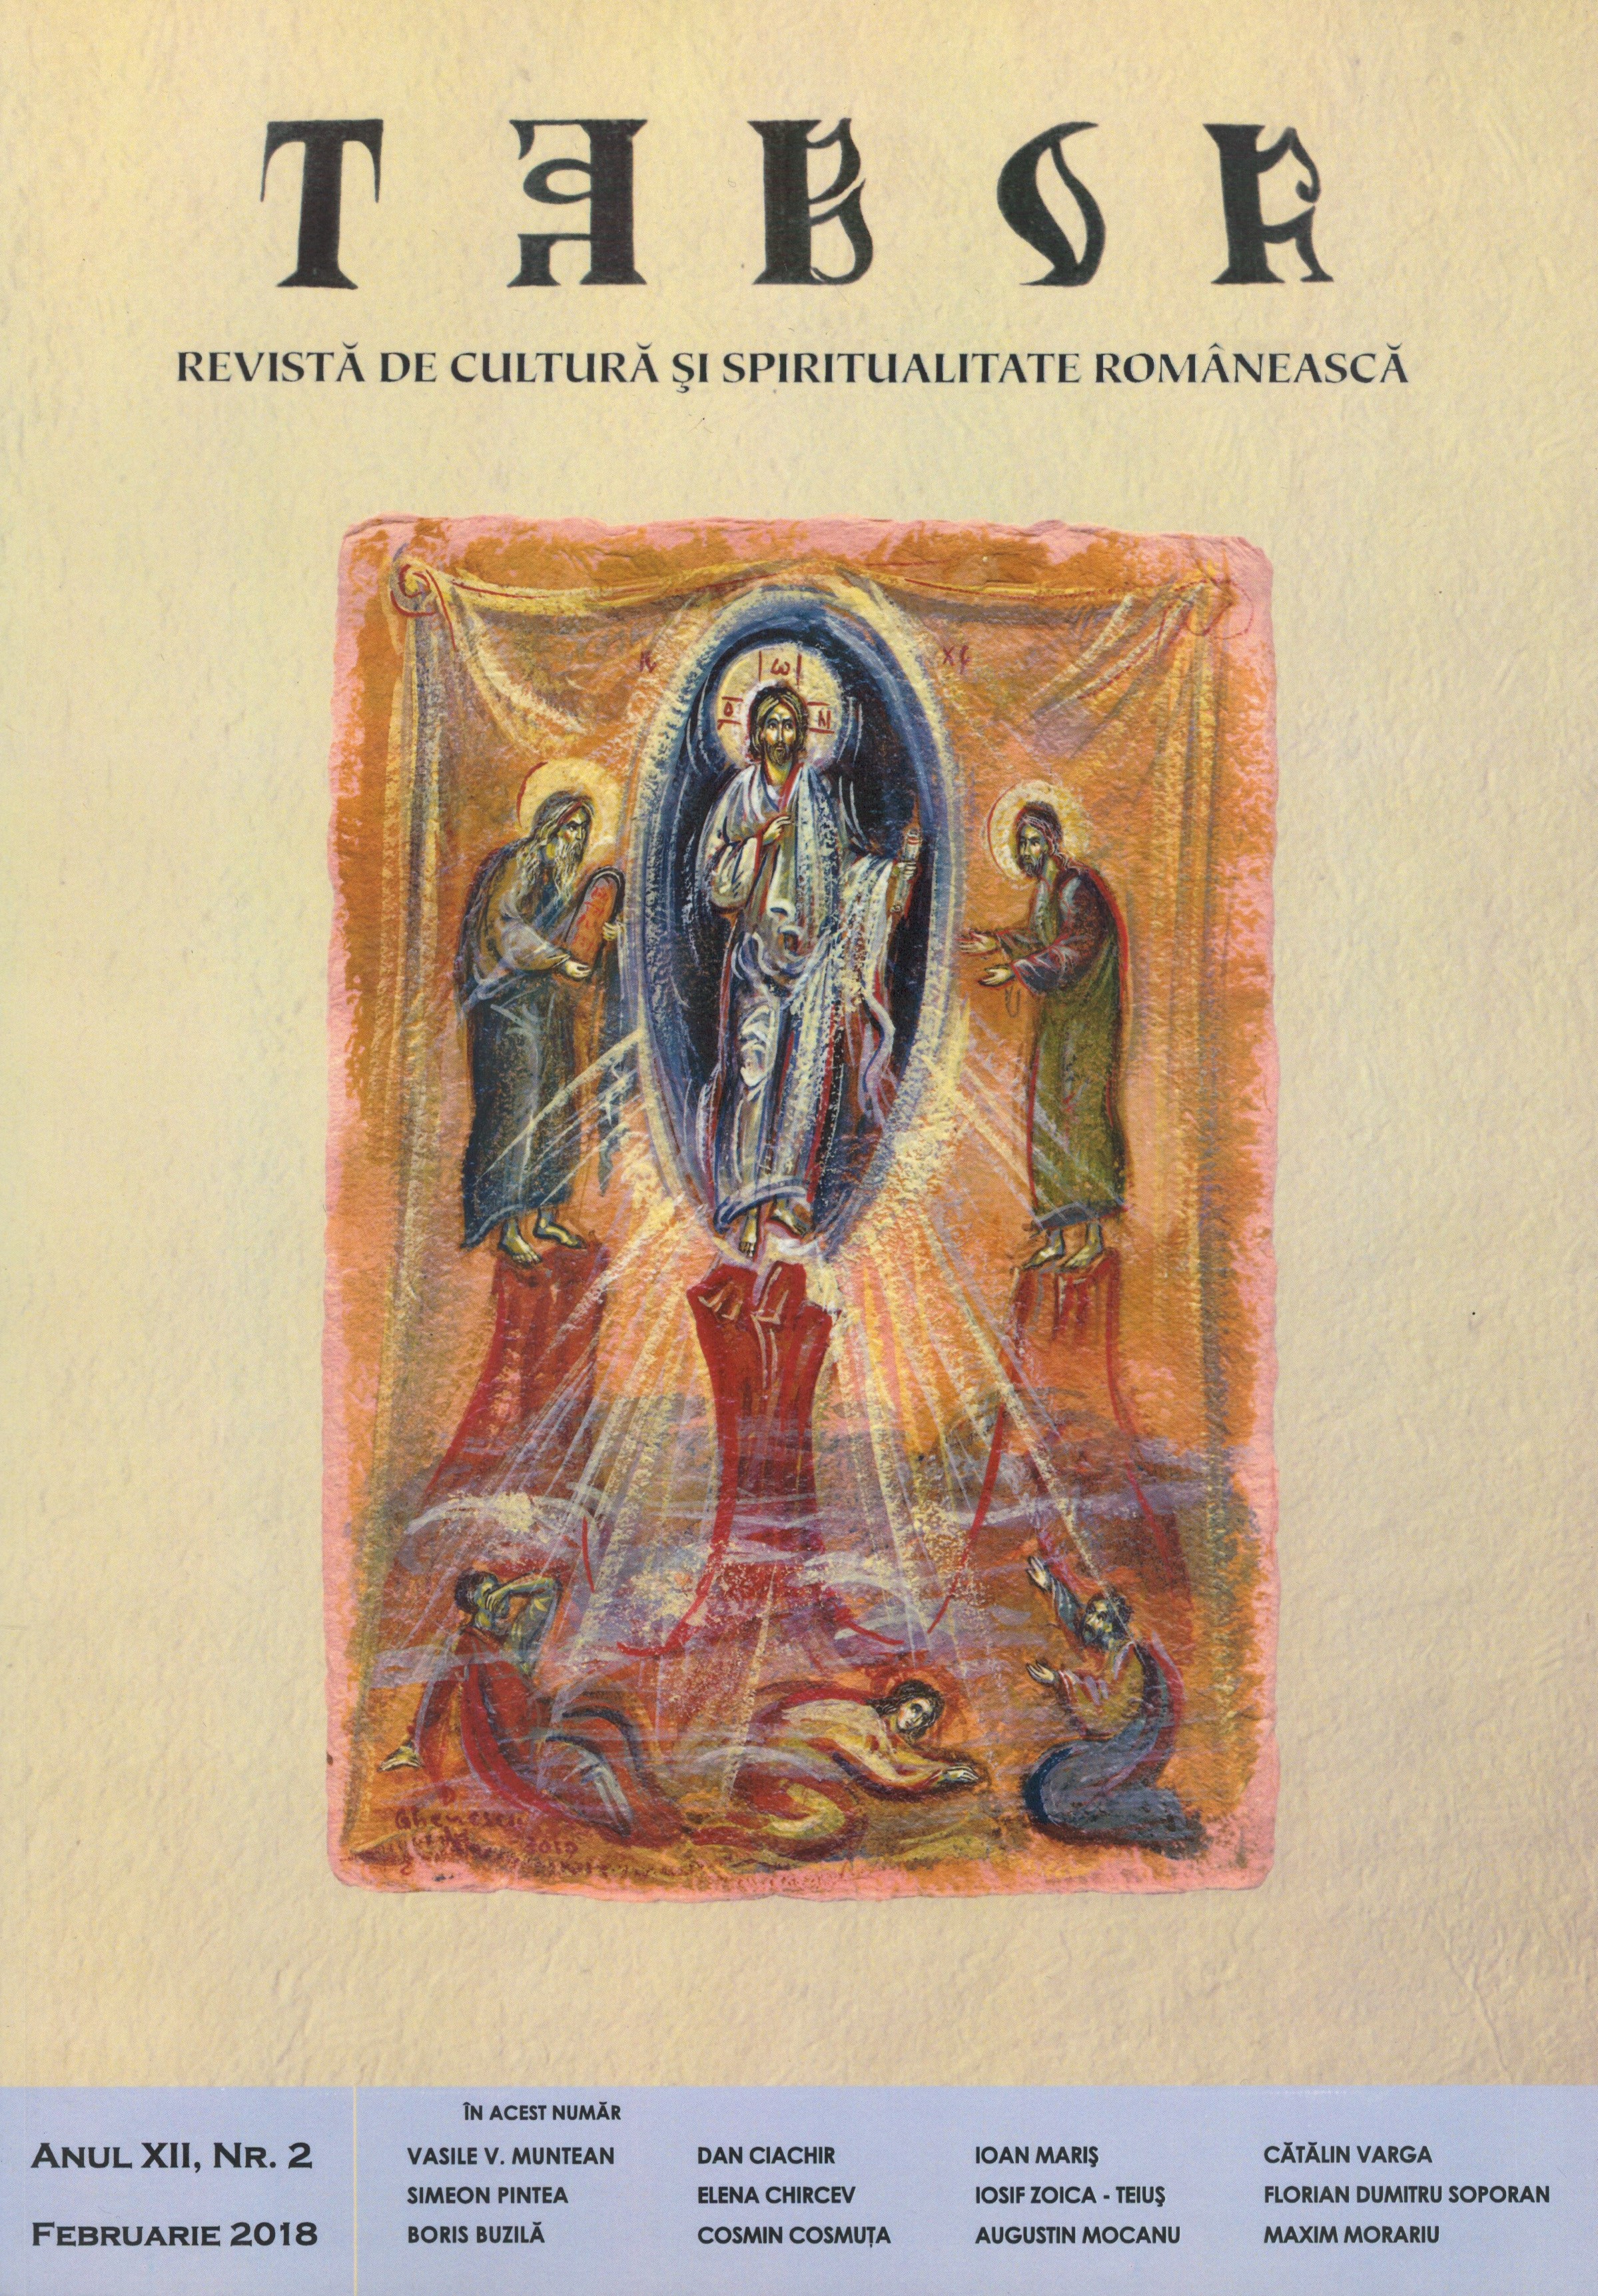 Our Ancient Christianity; The First Ecumenical Synod of Nicaea et alia (a few necessary thoughts) Cover Image